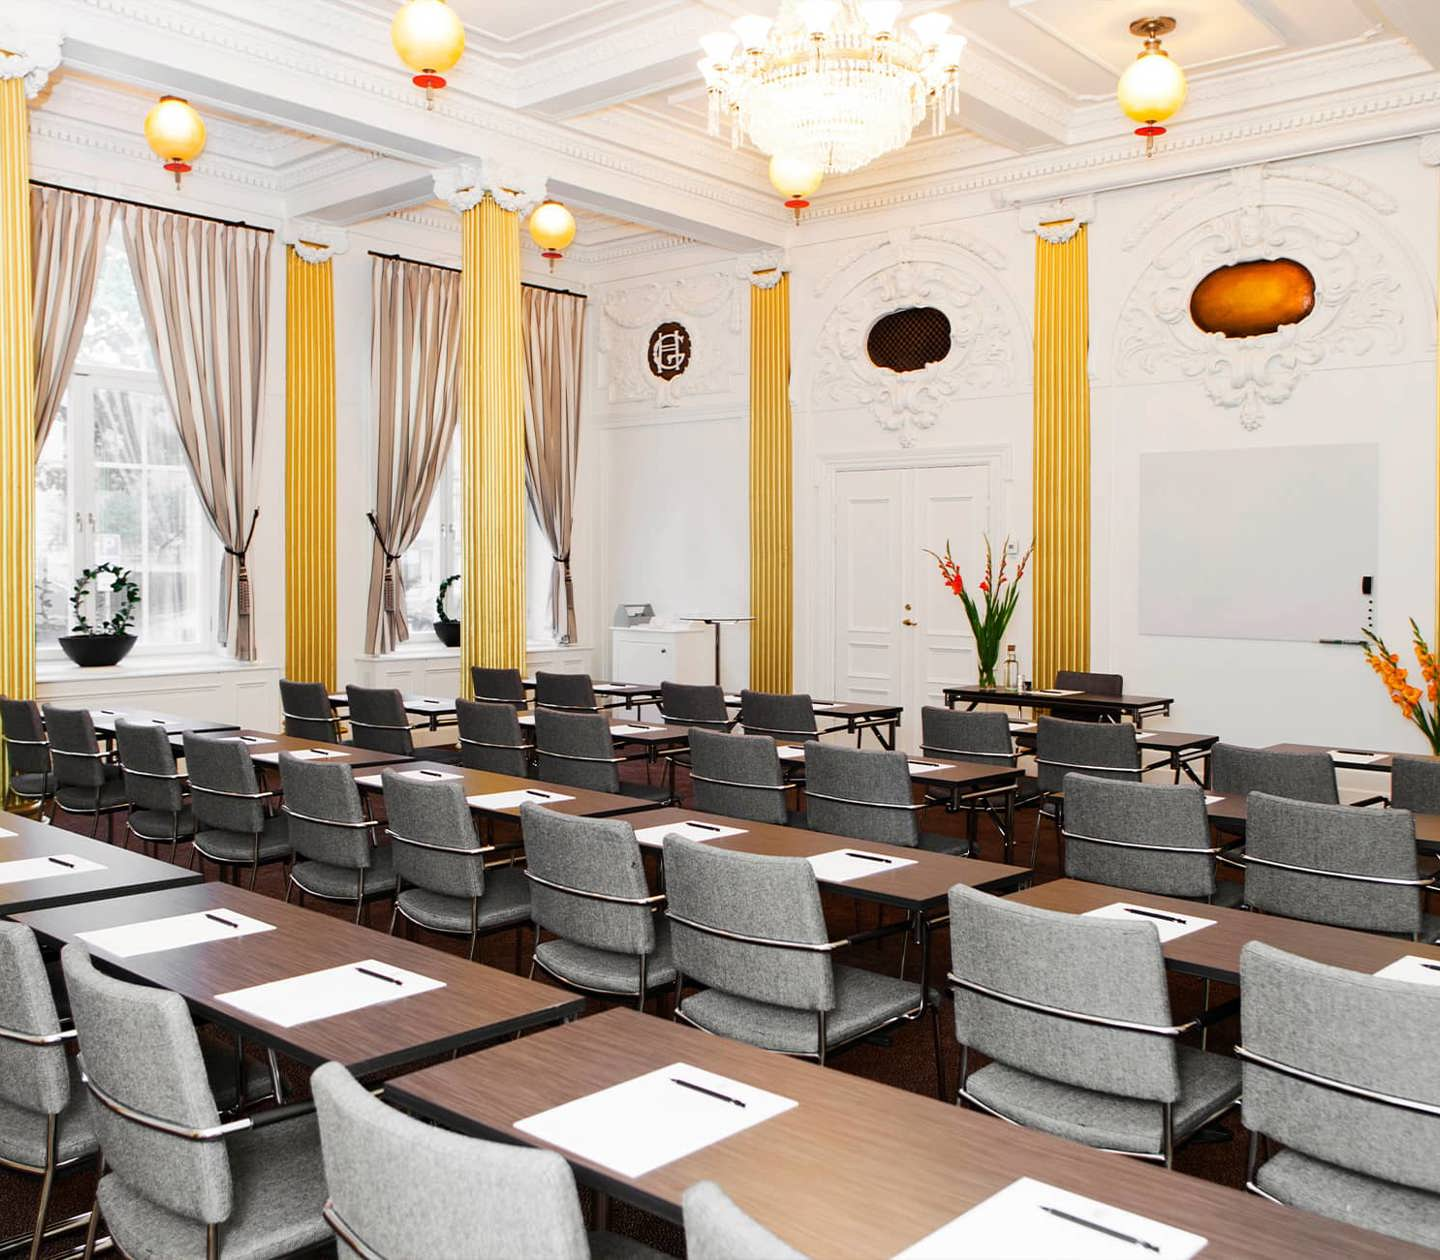 Magnificent conference room with many gray chairs